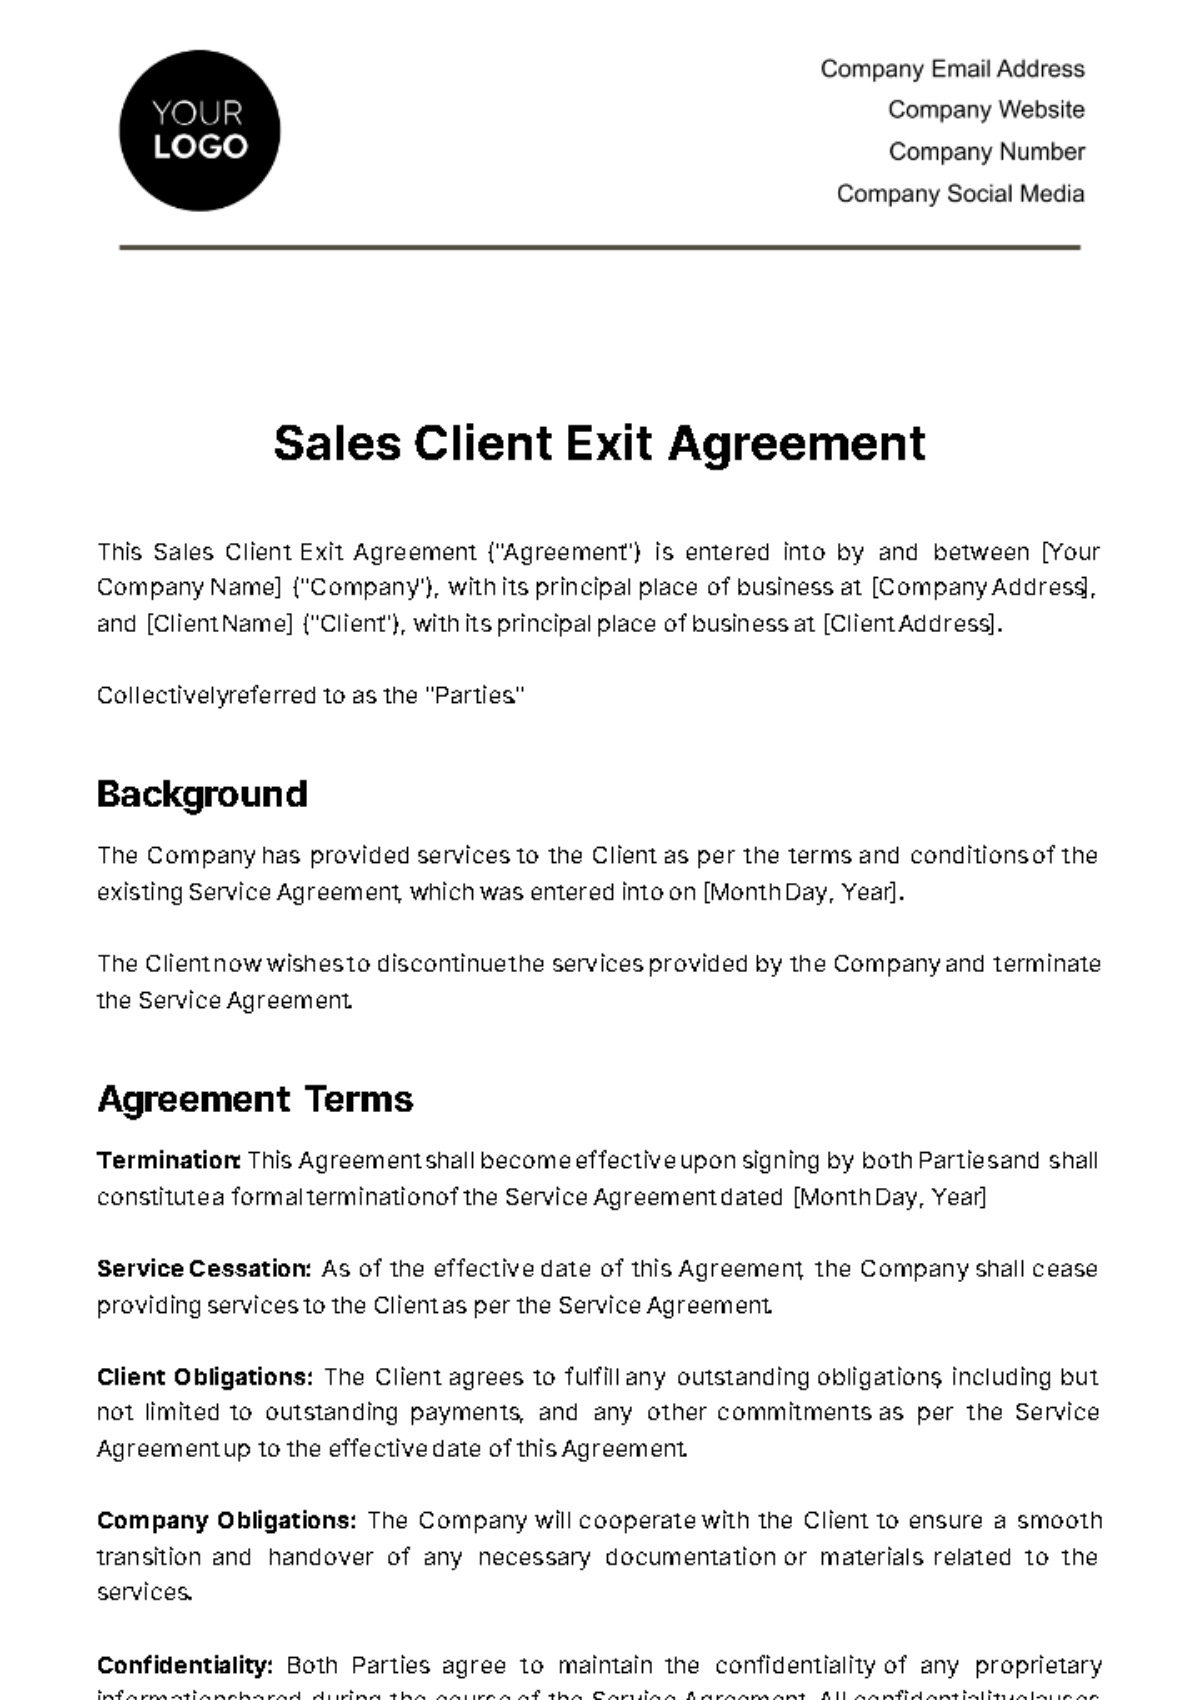 Free Sales Client Exit Agreement Template